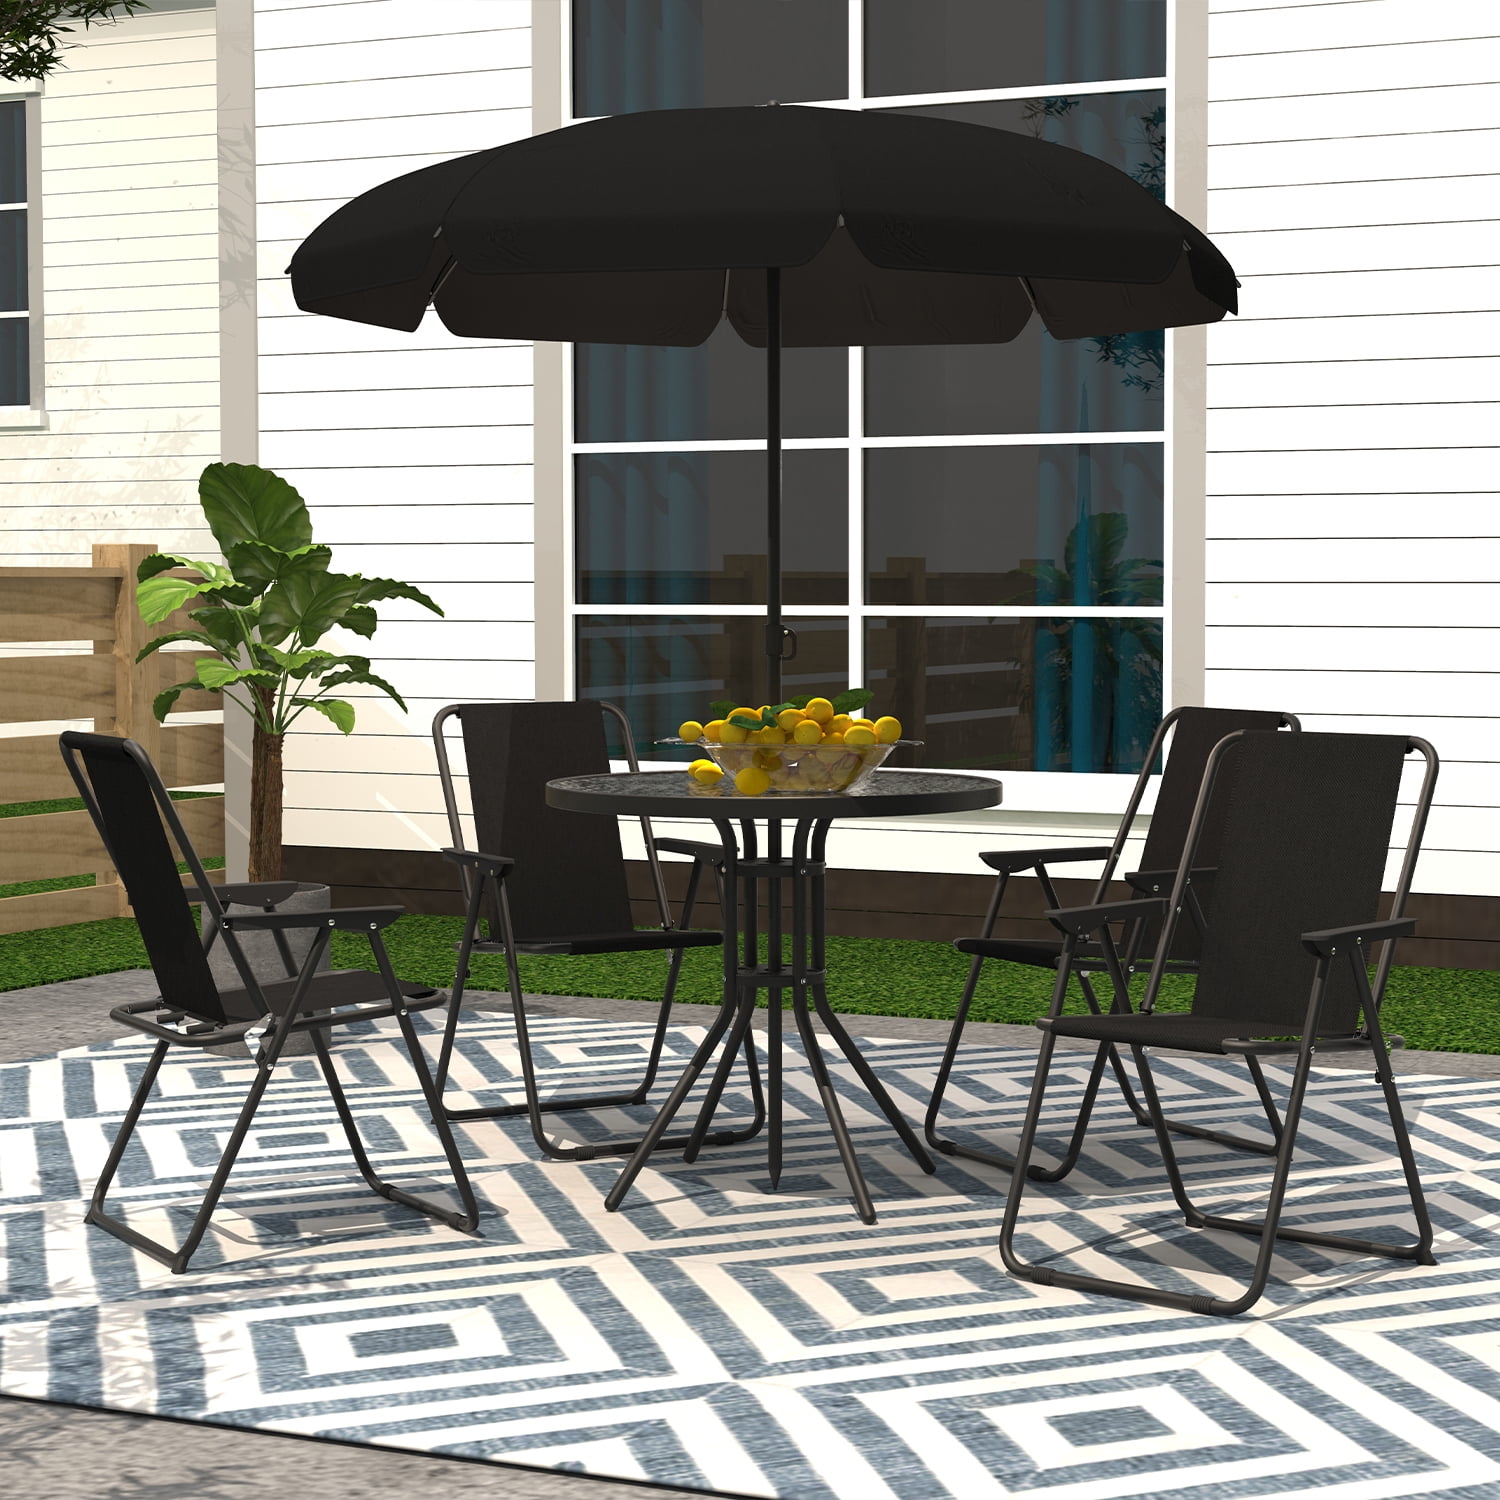 Details about   Metal Garden Round Patio Outdoor Dining Parasol Glass Table & Folding Chairs Set 